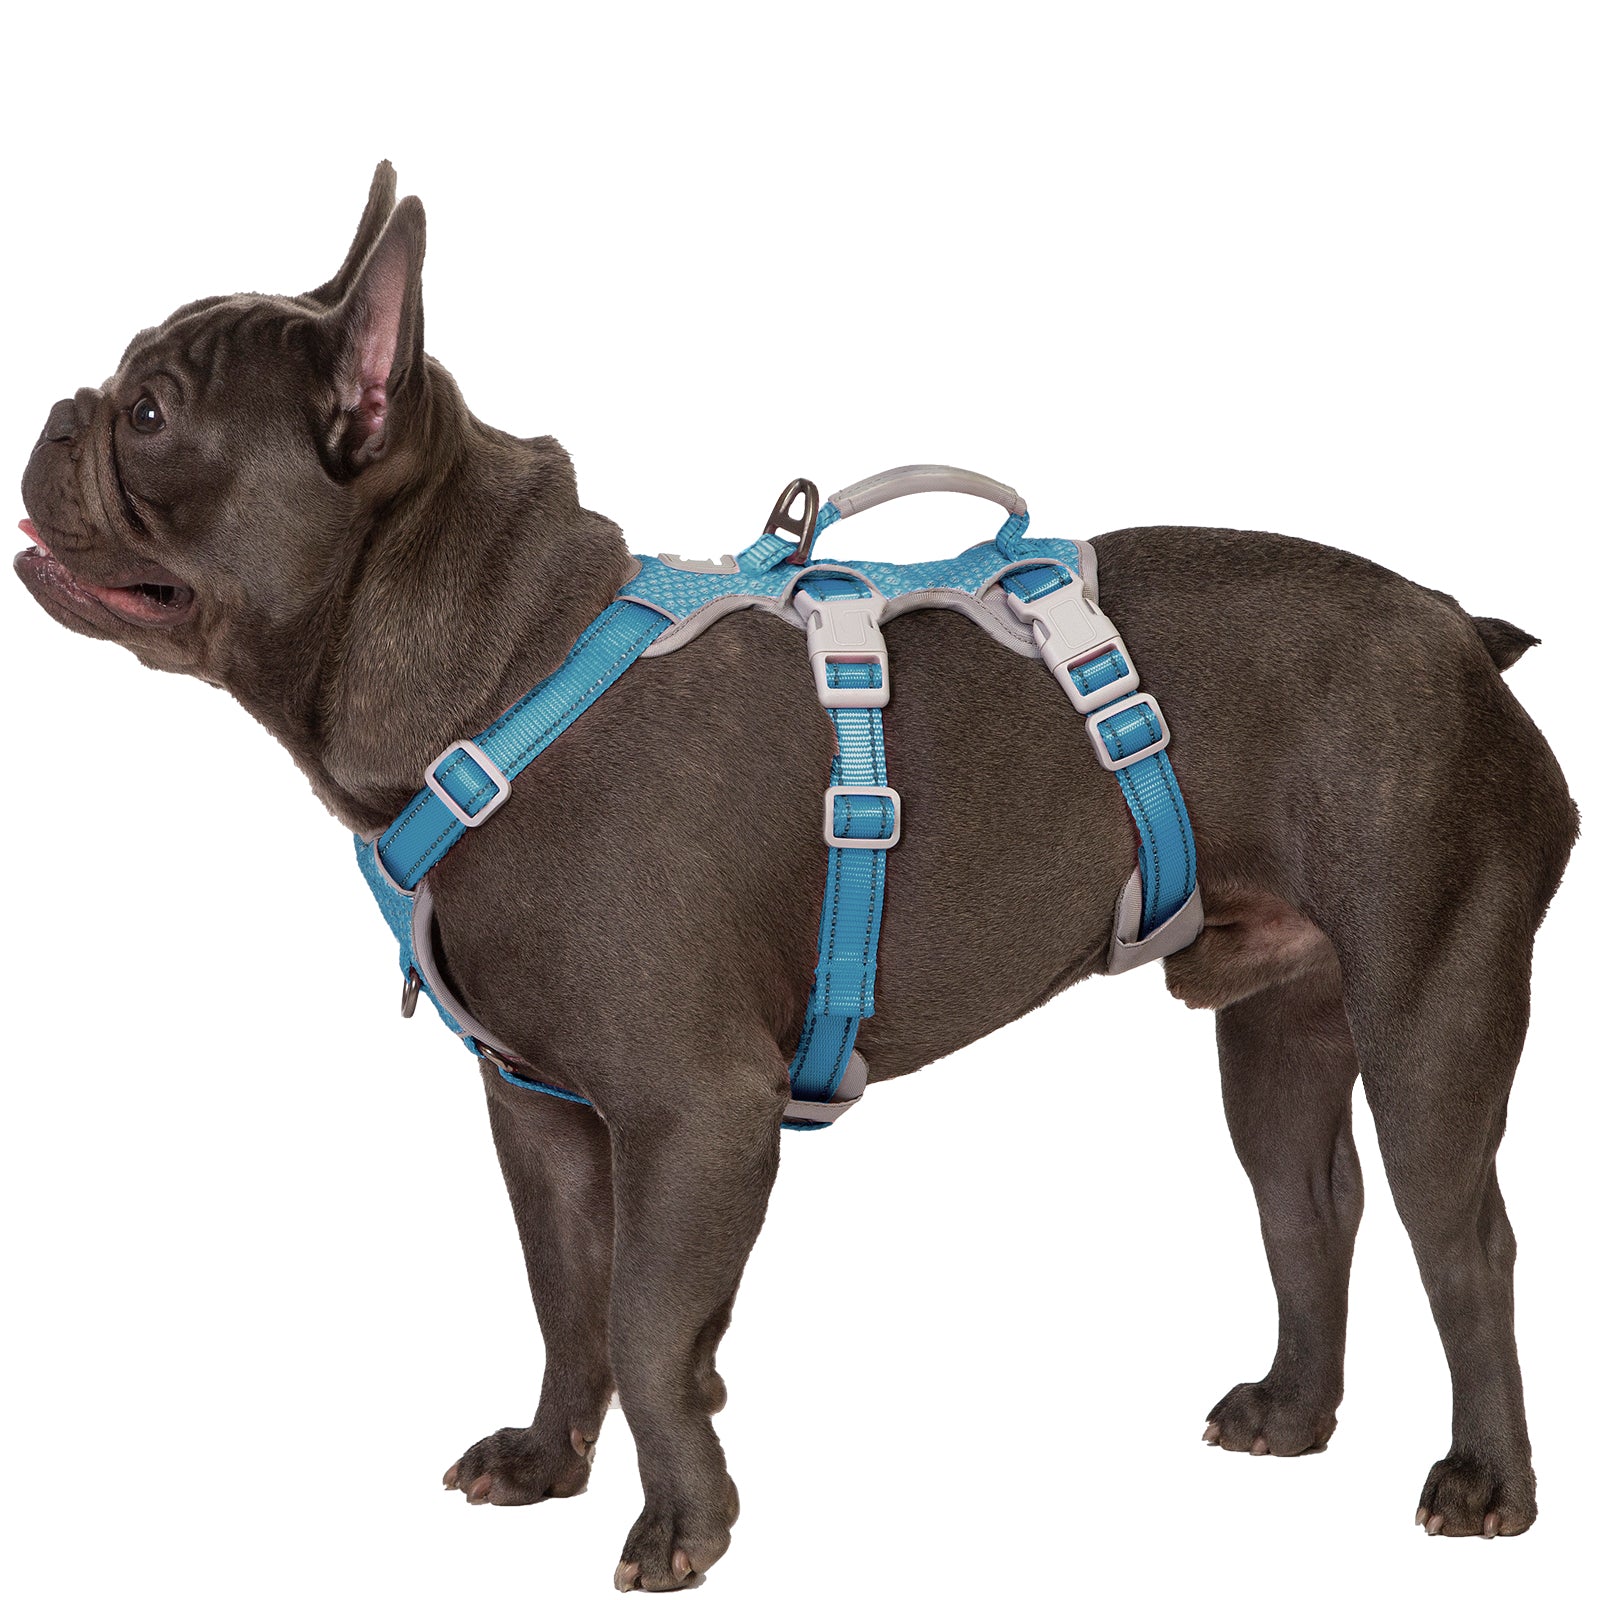 Escape Proof and No Pull Dog Harness Teal